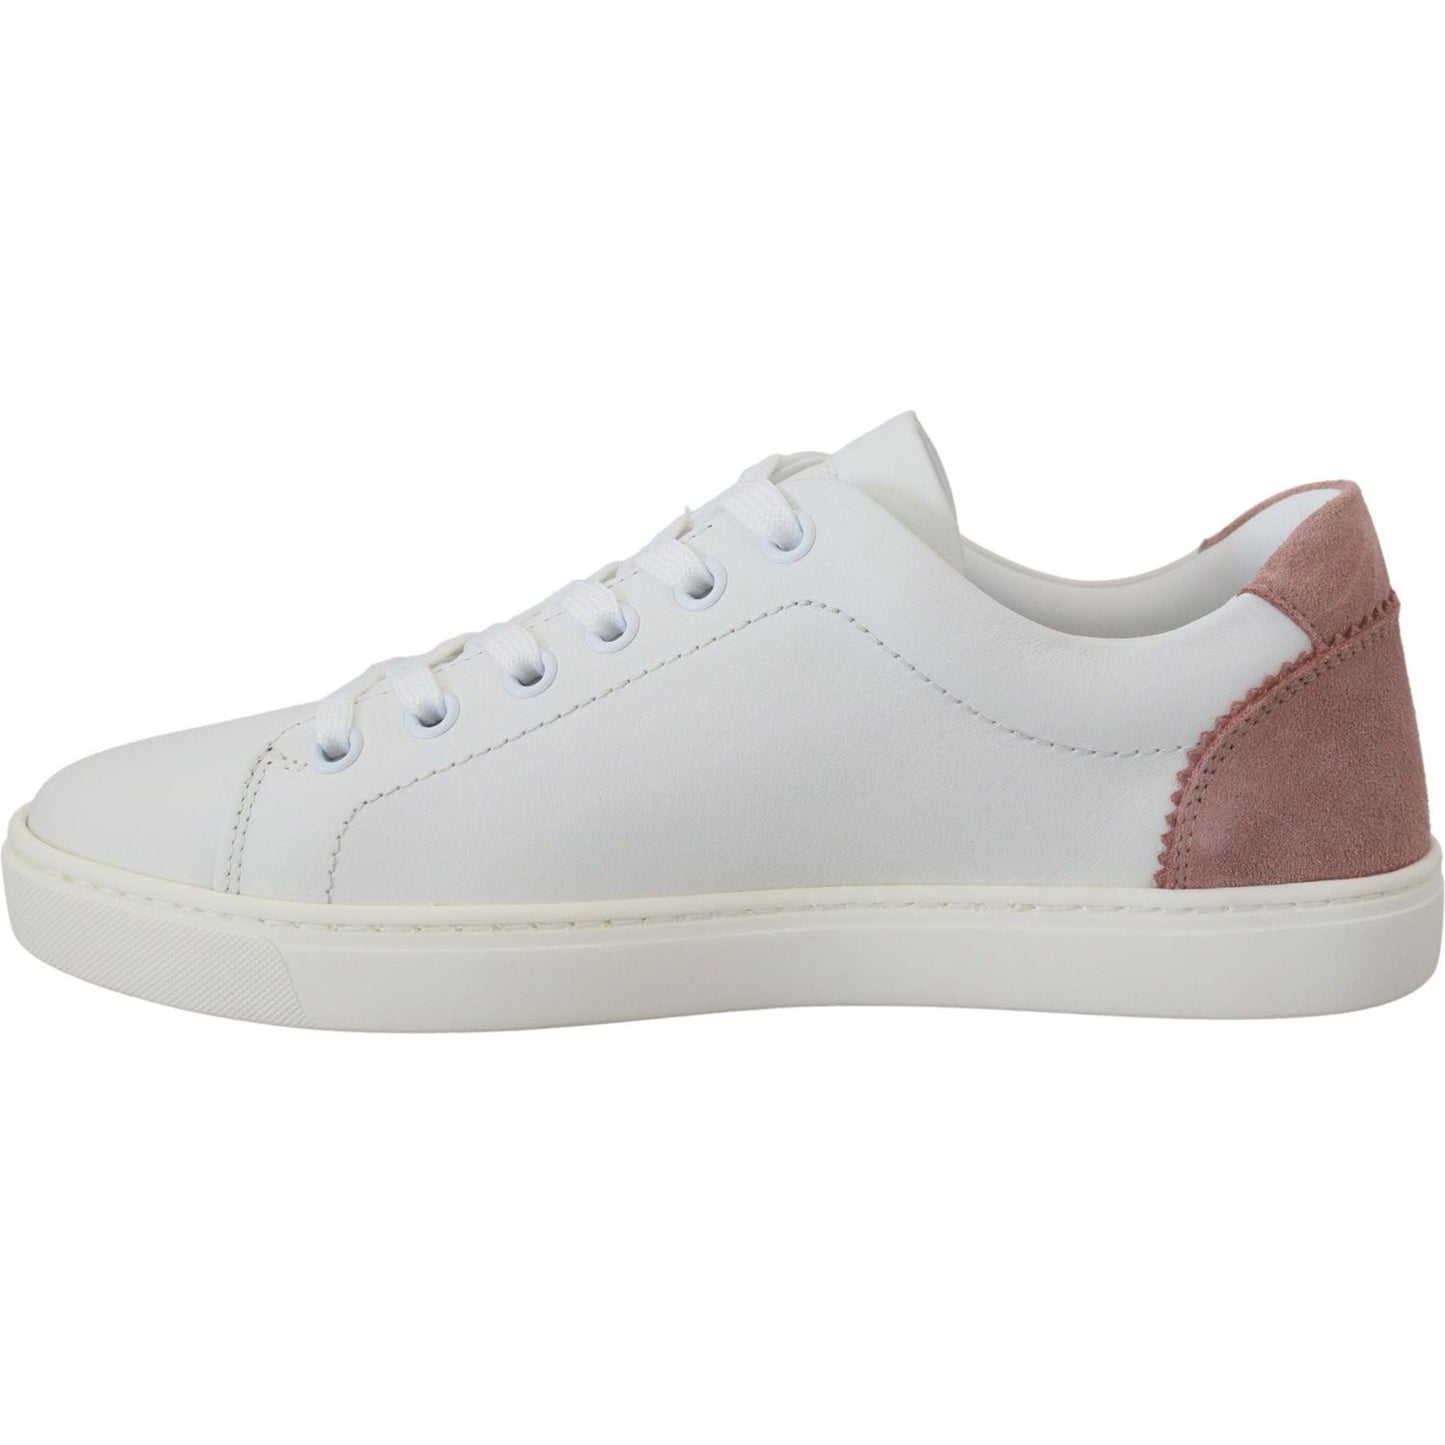 Dolce & Gabbana Chic White Pink Leather Low-Top Sneakers white-pink-leather-low-top-sneakers-shoes